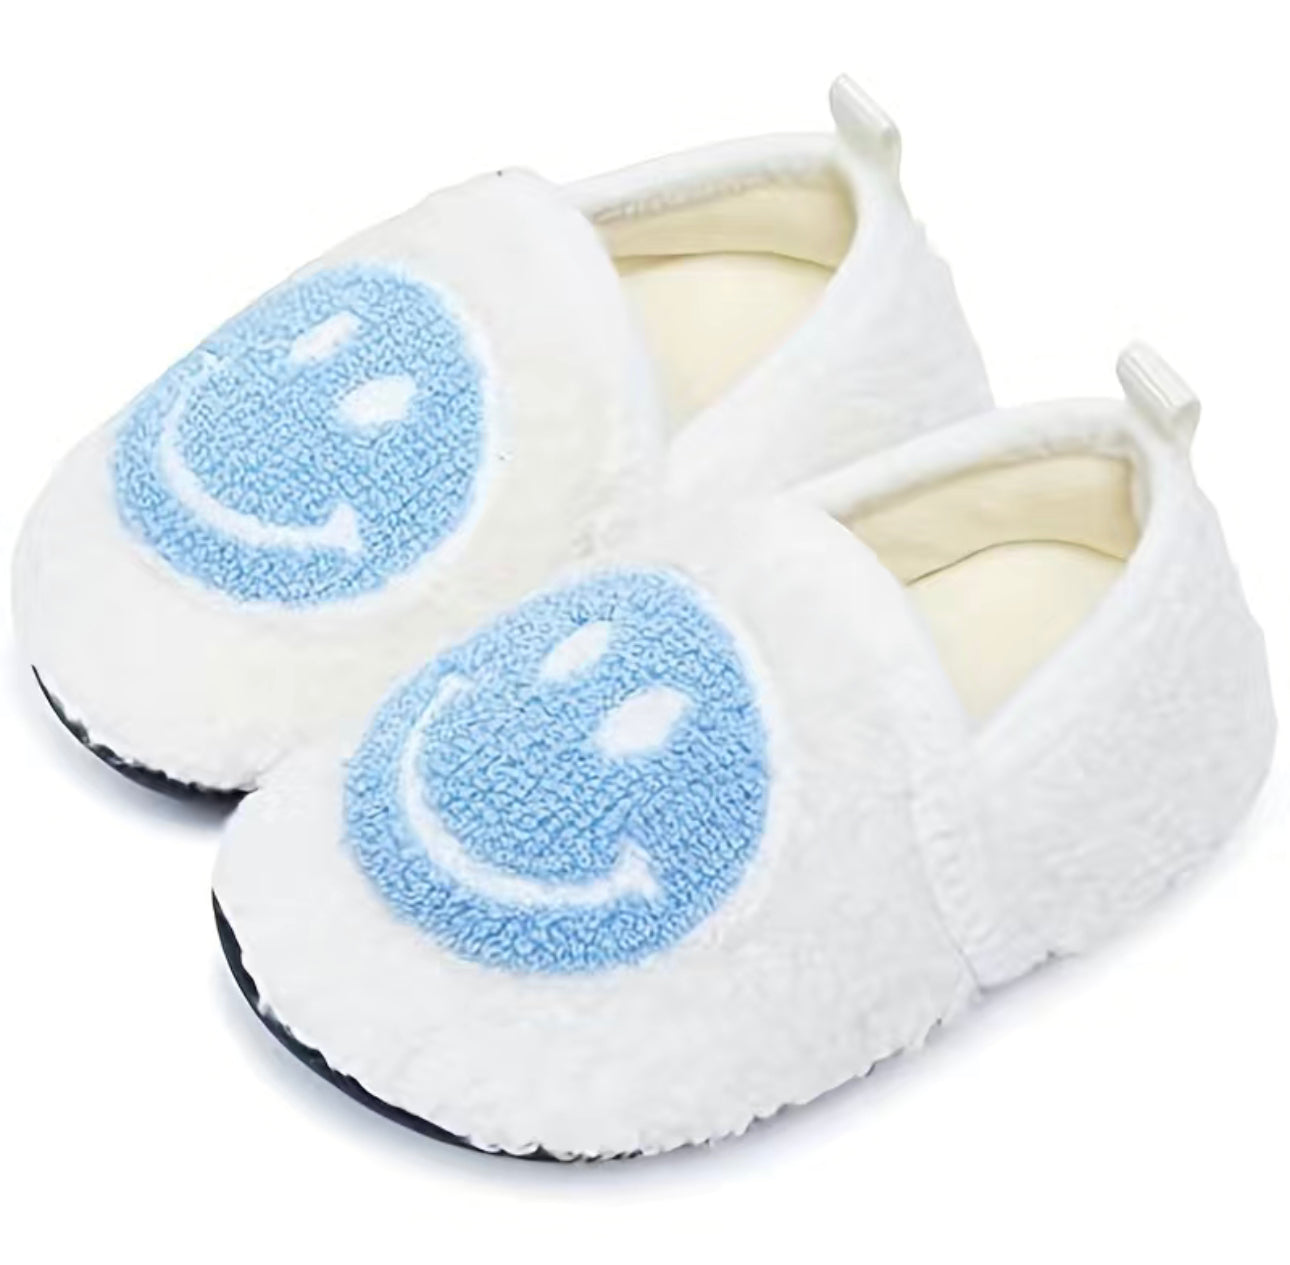 Toddler Smiley Slippers